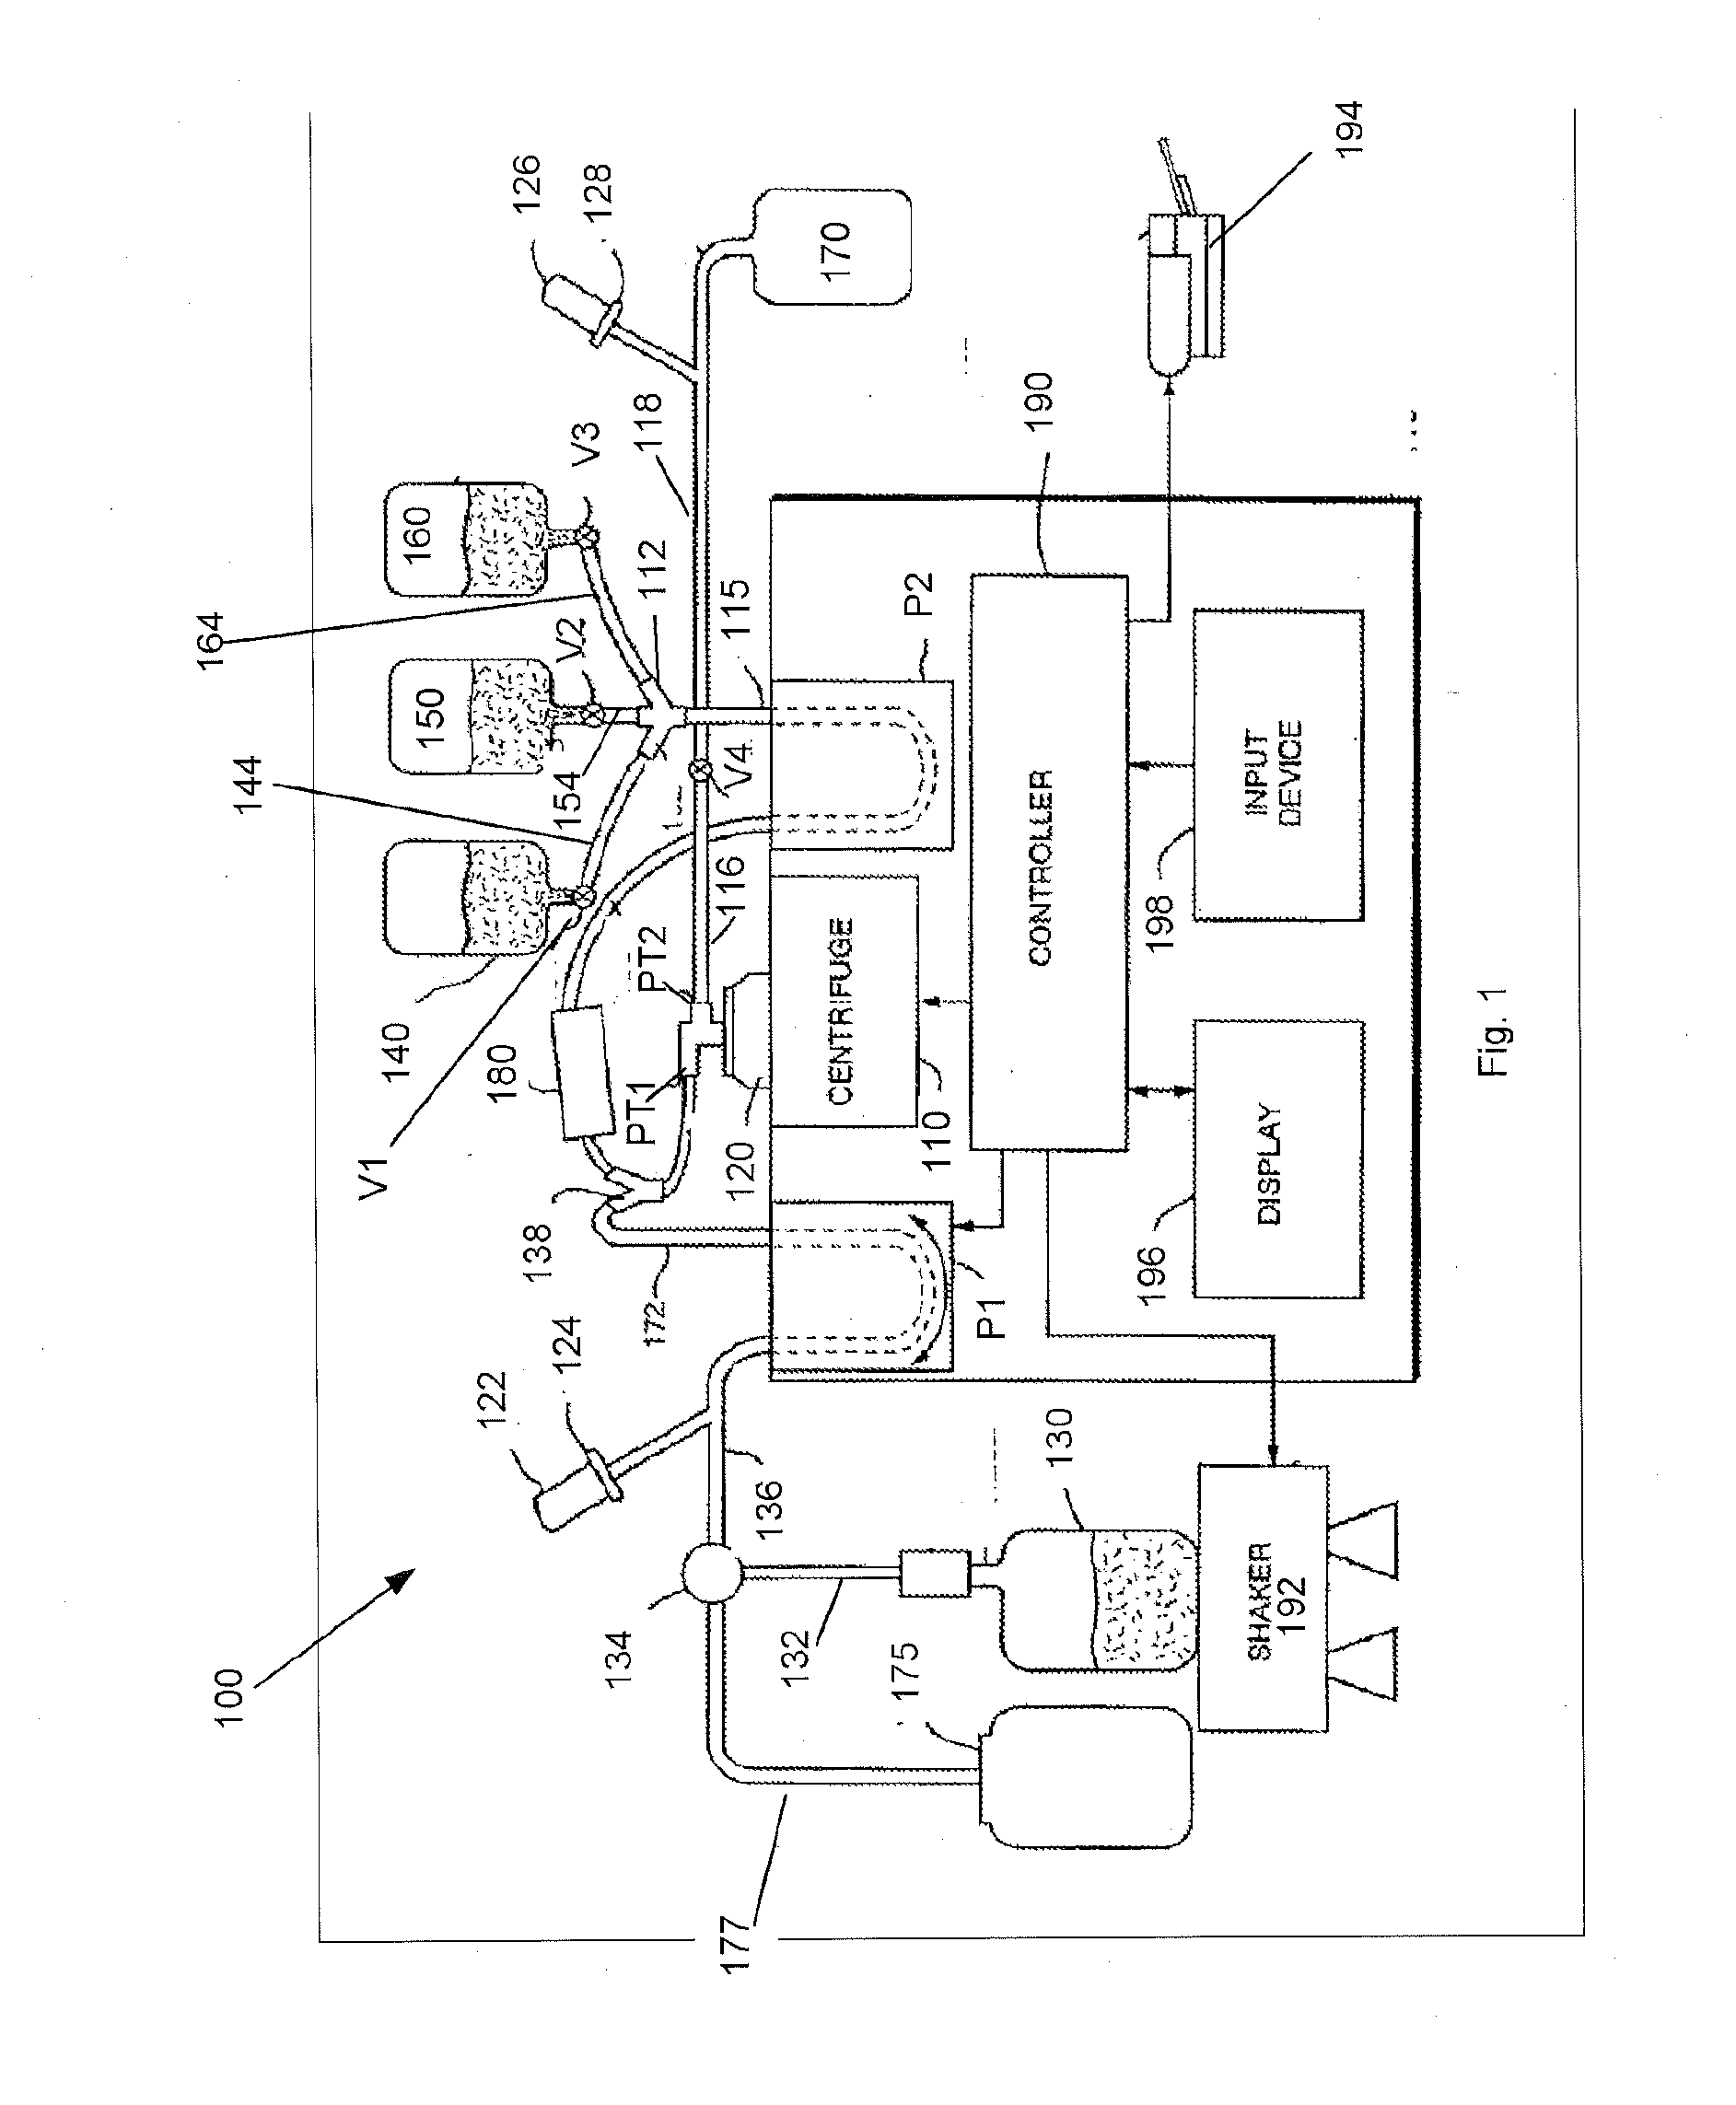 System and Method For Automated Platelet Wash